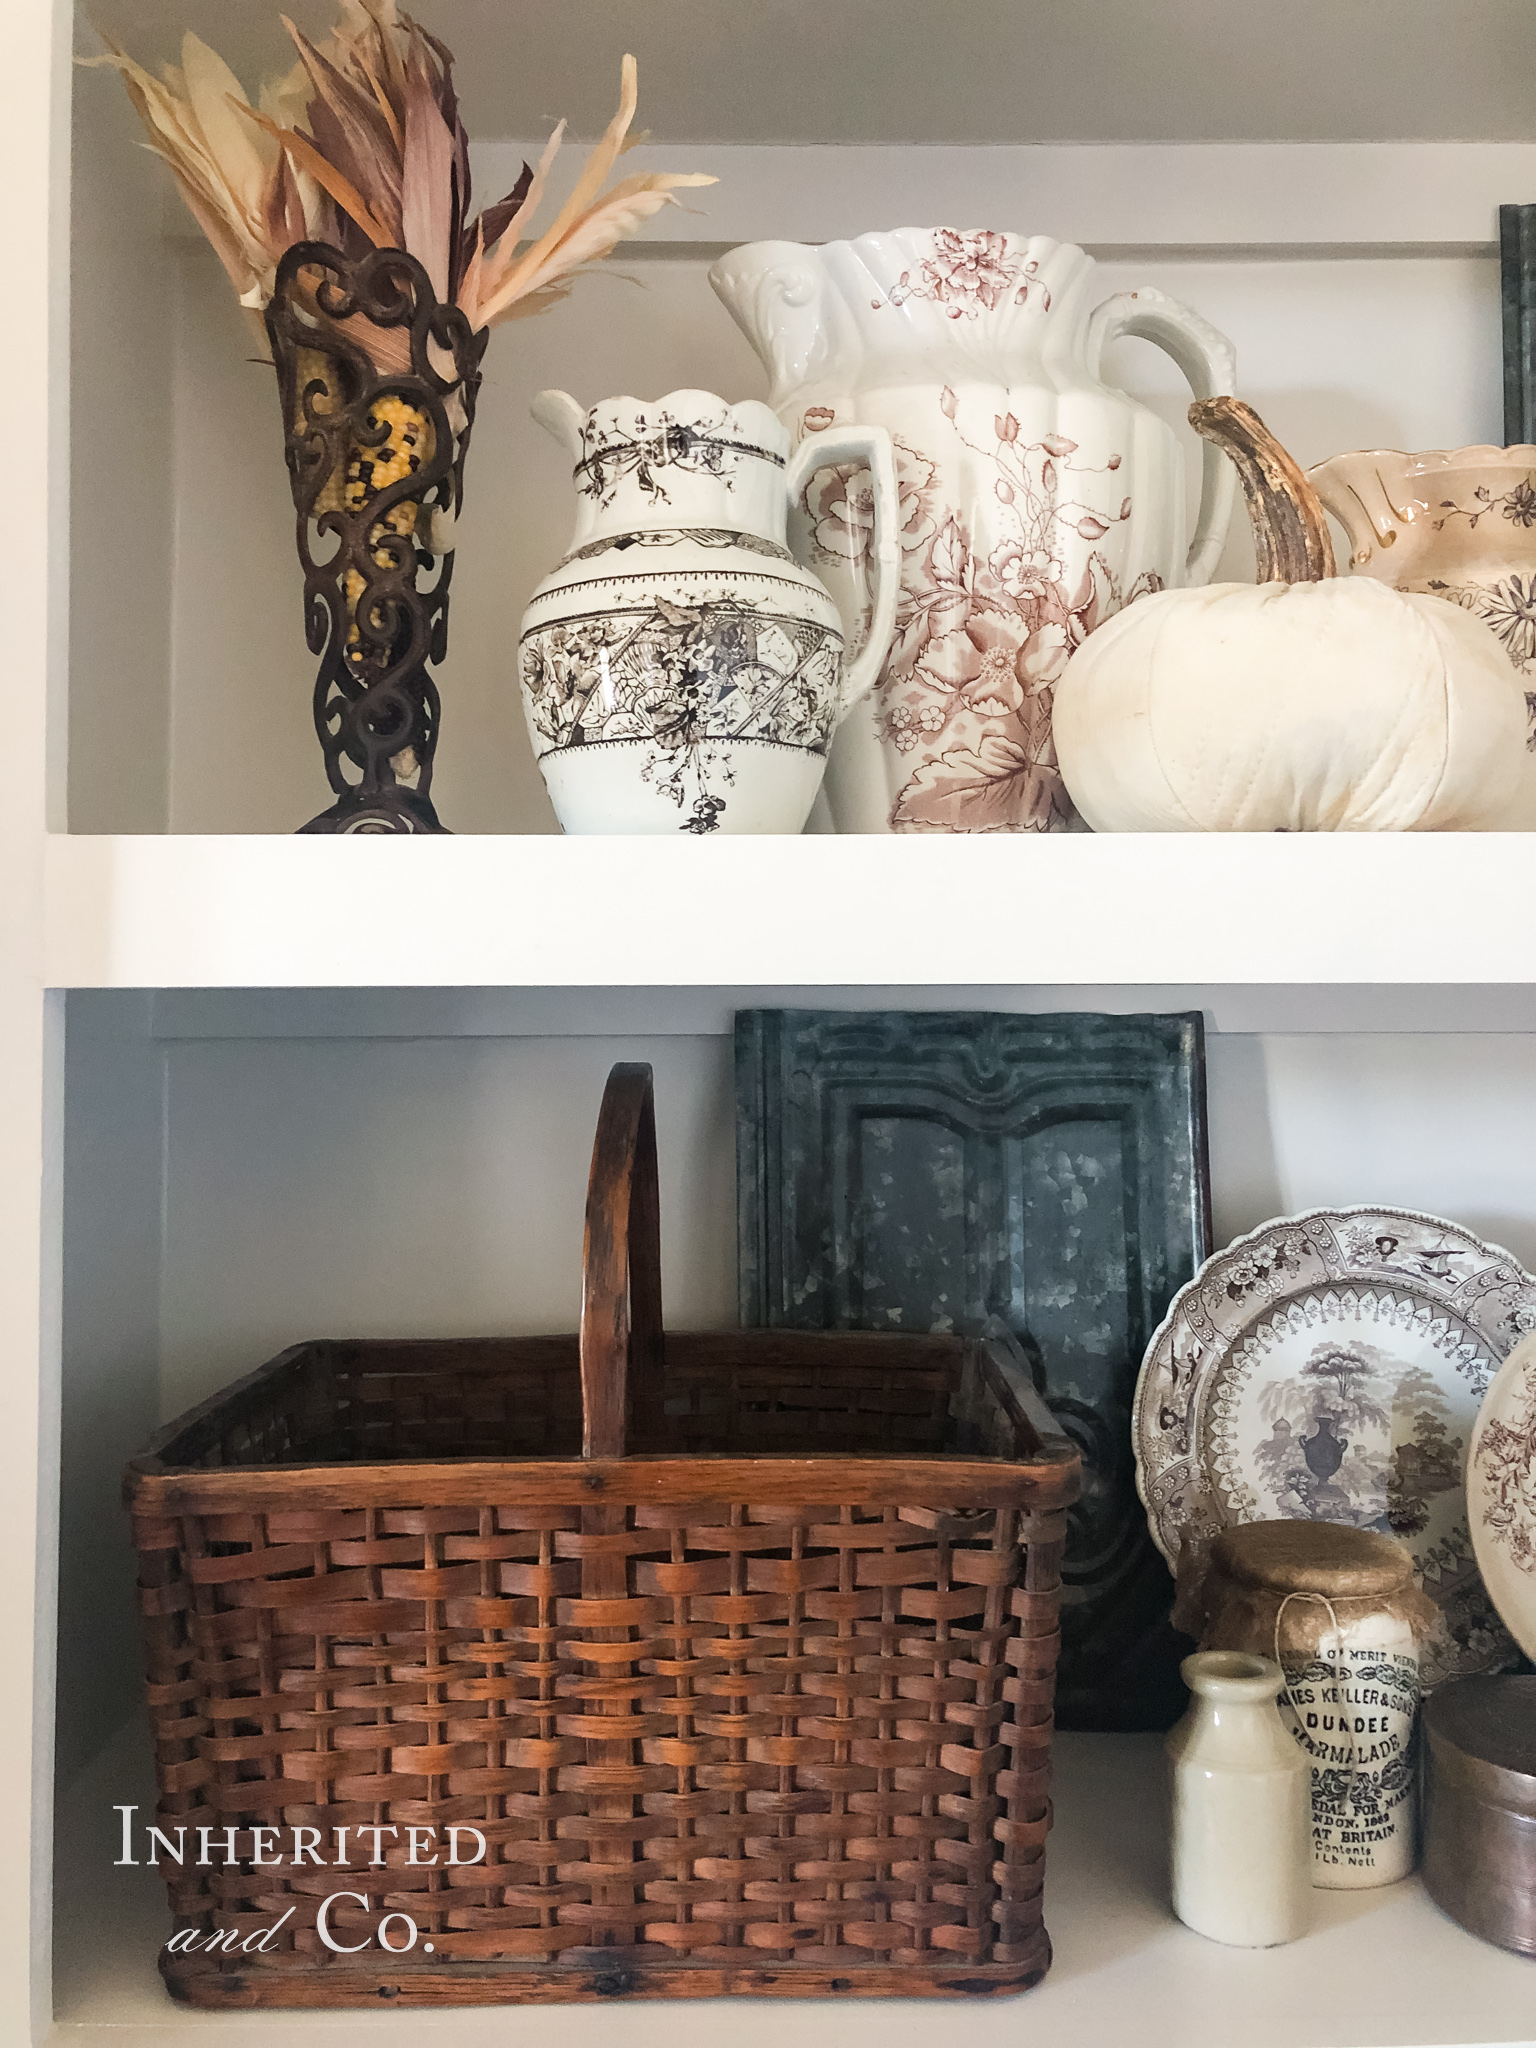 Two white built-in shelves filled with antiques such as brown transferware plates and pitchers, stoneware, harvest baskets, and weathered metal